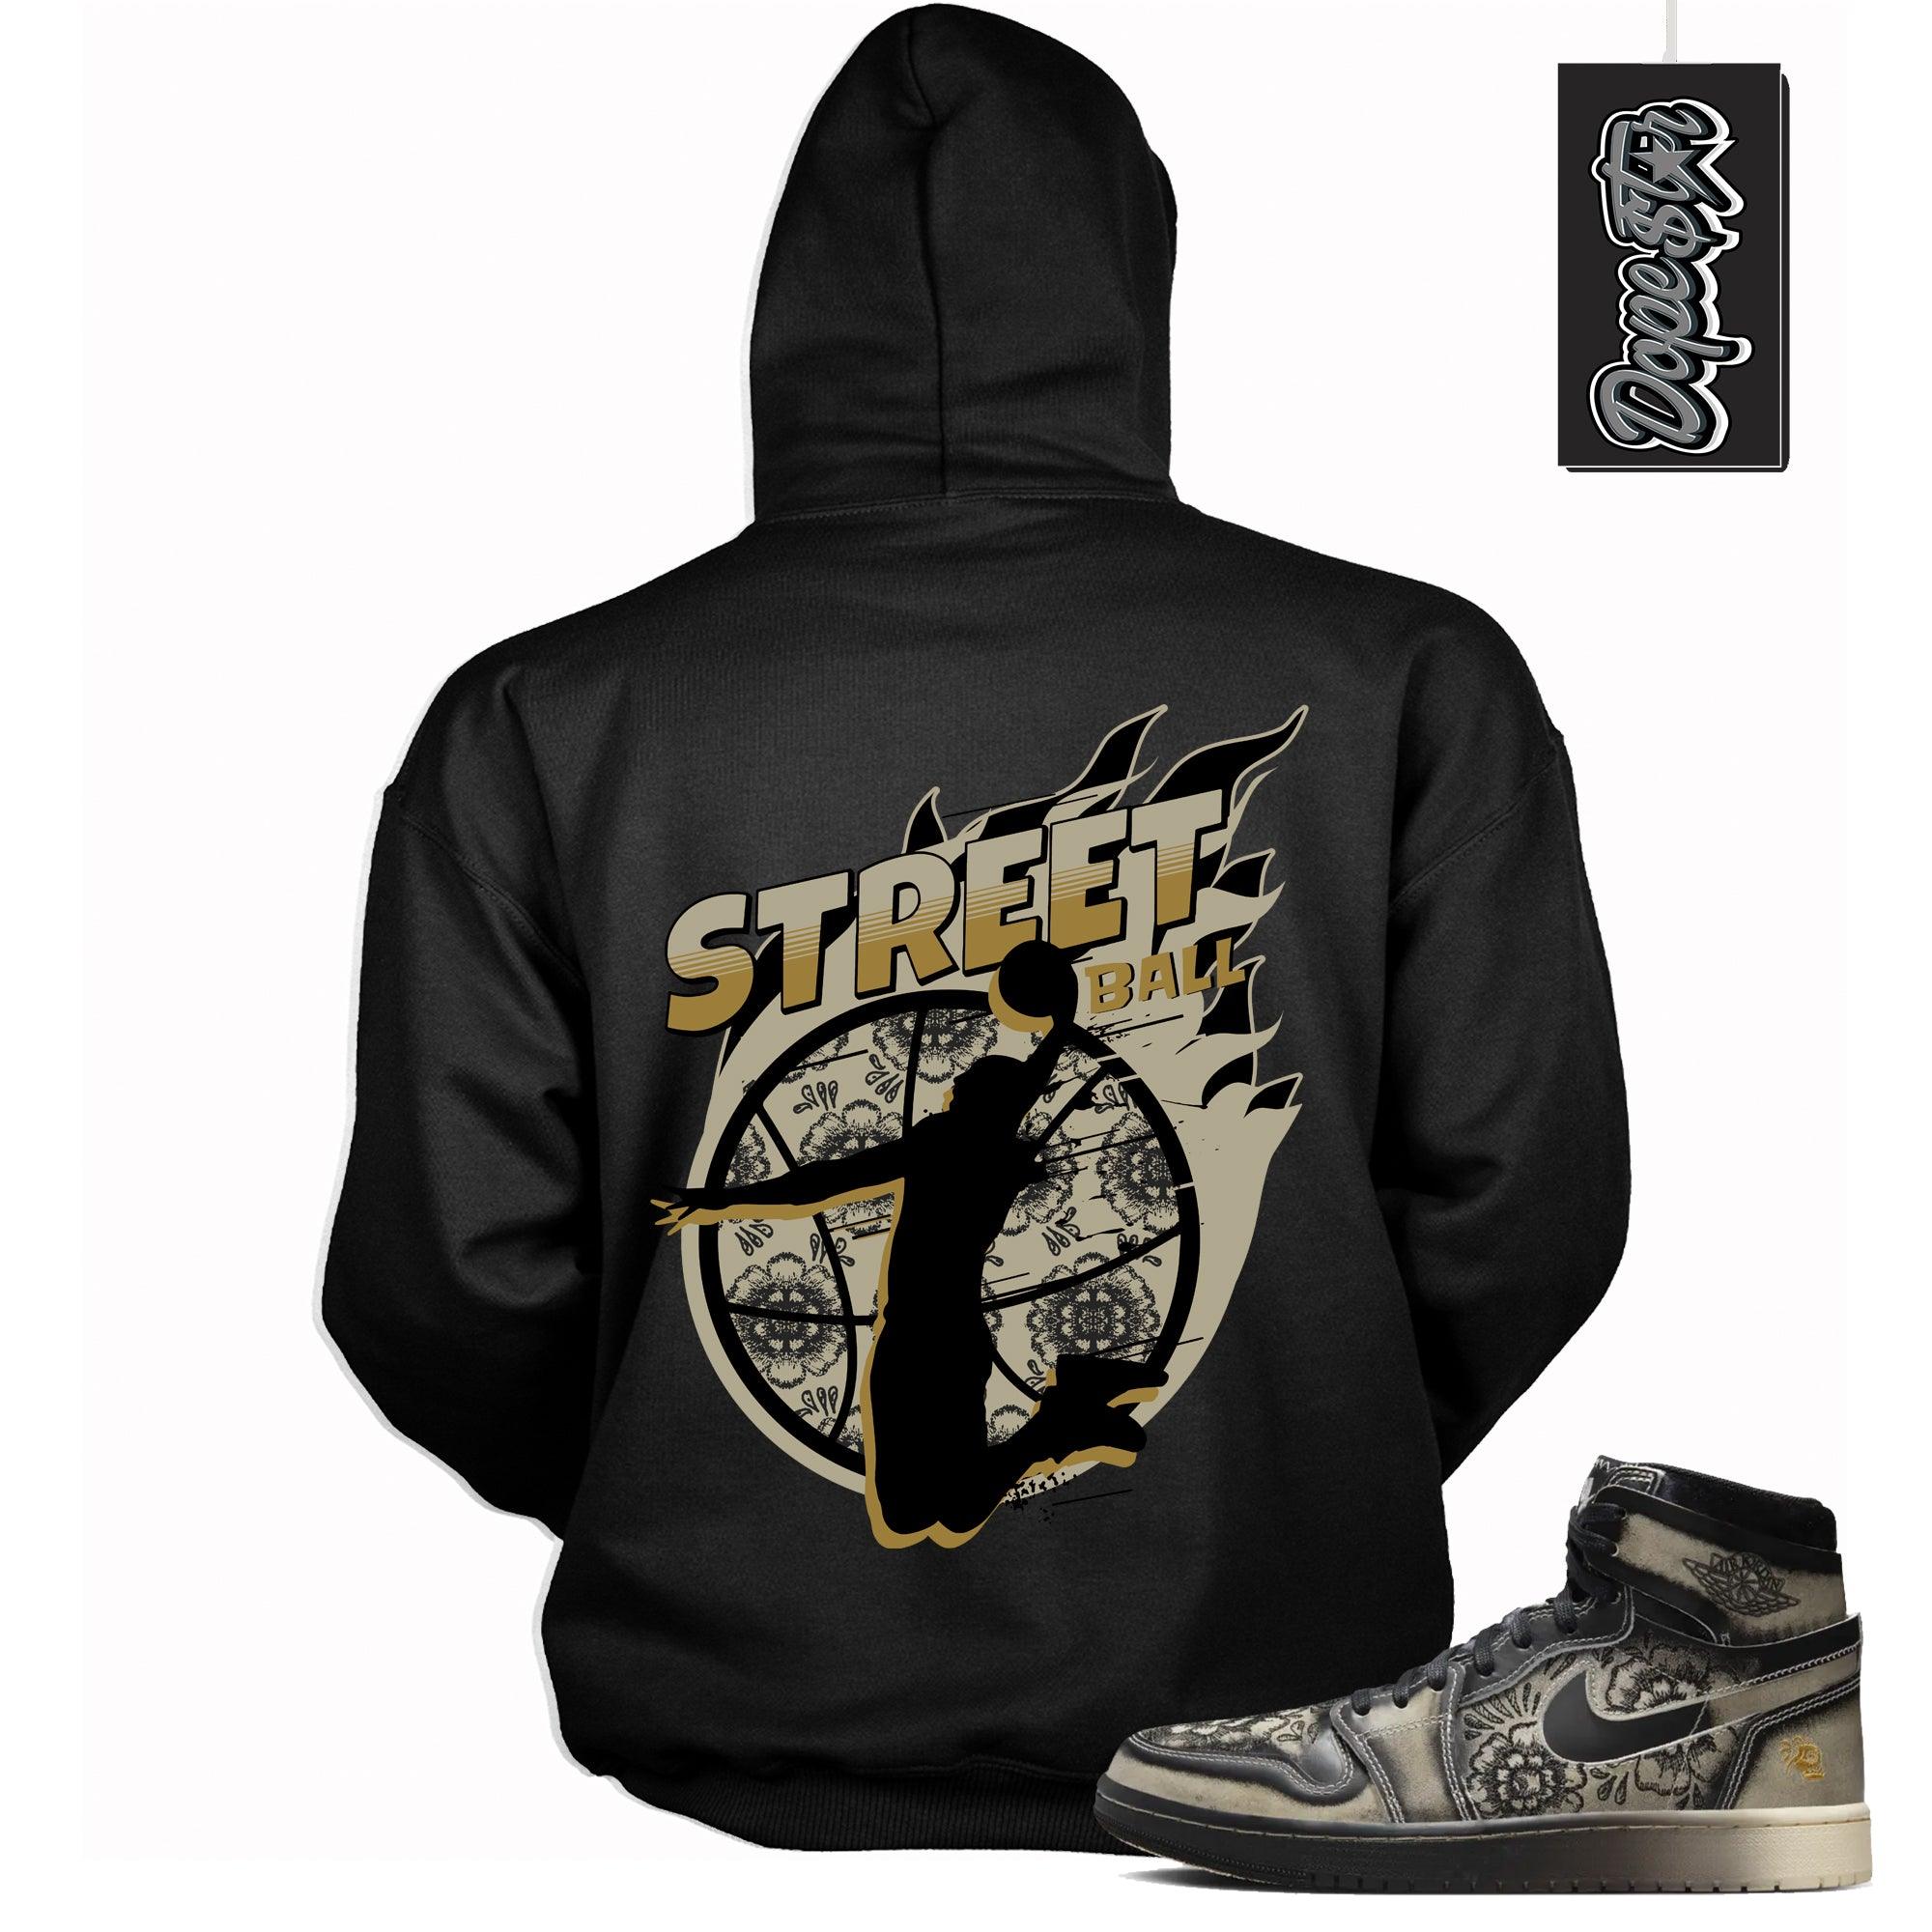 Cool Black Graphic Hoodie with “ Street Ball “ print, that perfectly matches Air Jordan 1 High Zoom Comfort 2 Dia de Muertos Black and Pale Ivory sneakers